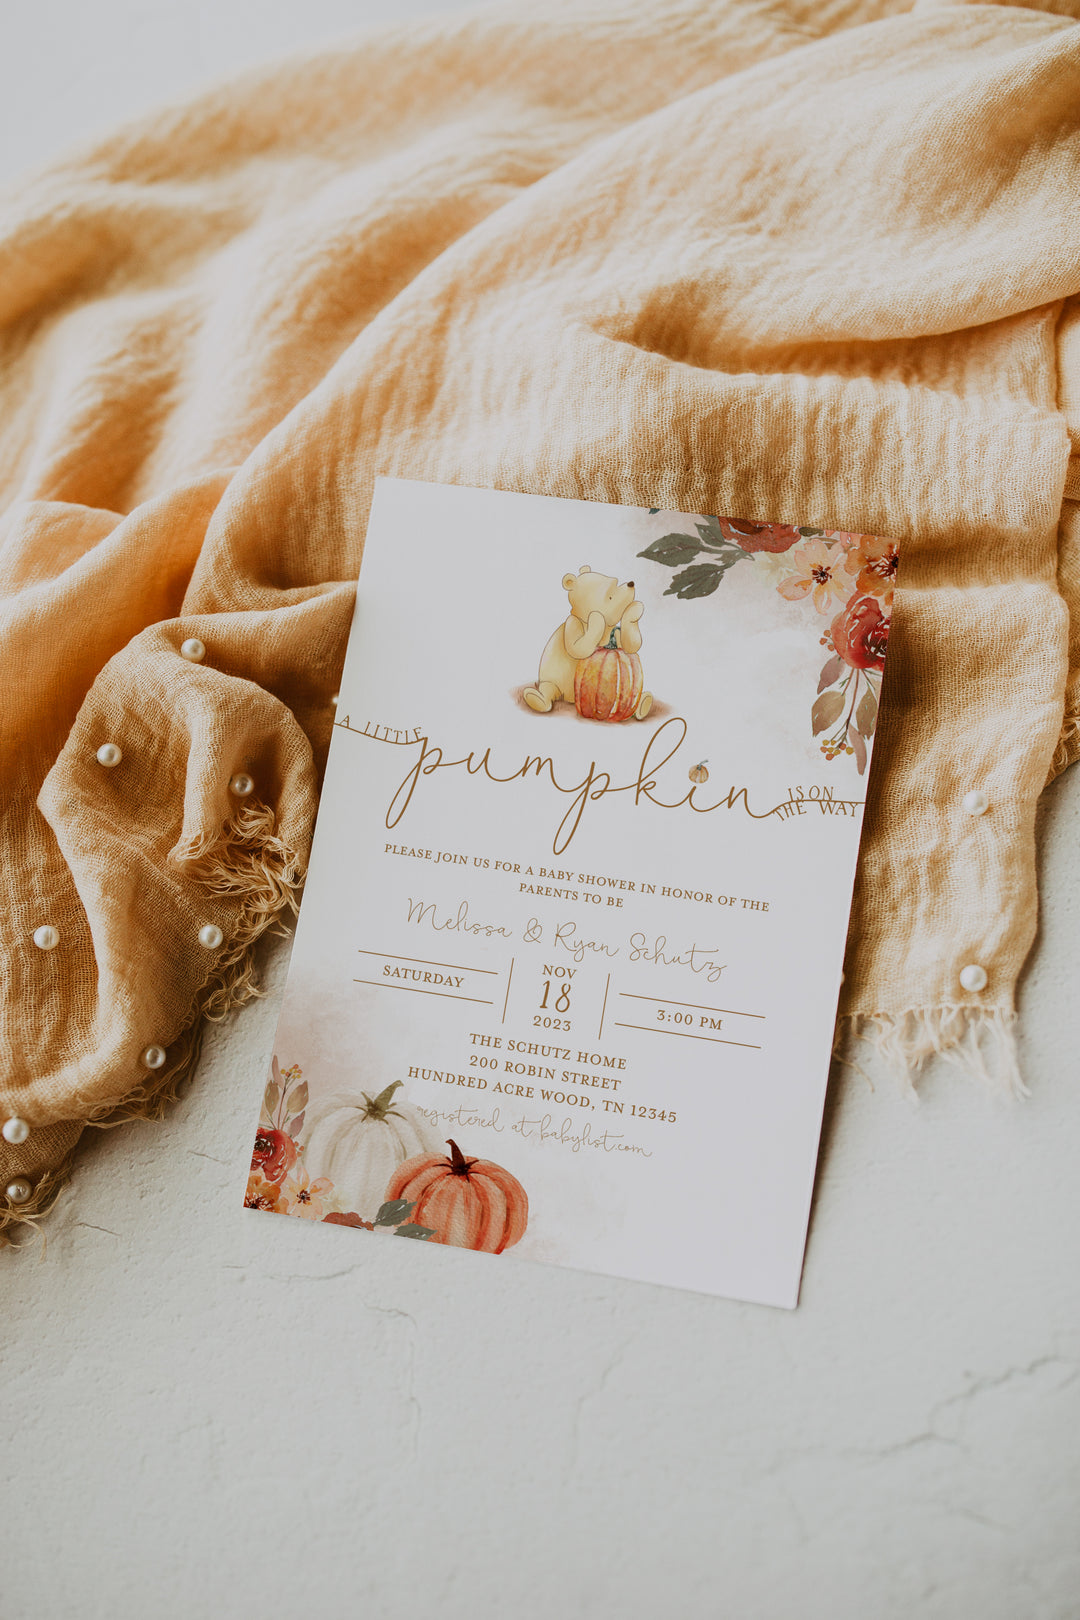 A Little Pumpkin Is On The Way Invitation - Winnie The Pooh Pumpkin Baby Shower Invitation - Pooh Bear Baby Shower Invite - Fall Pooh Baby Shower Invitation